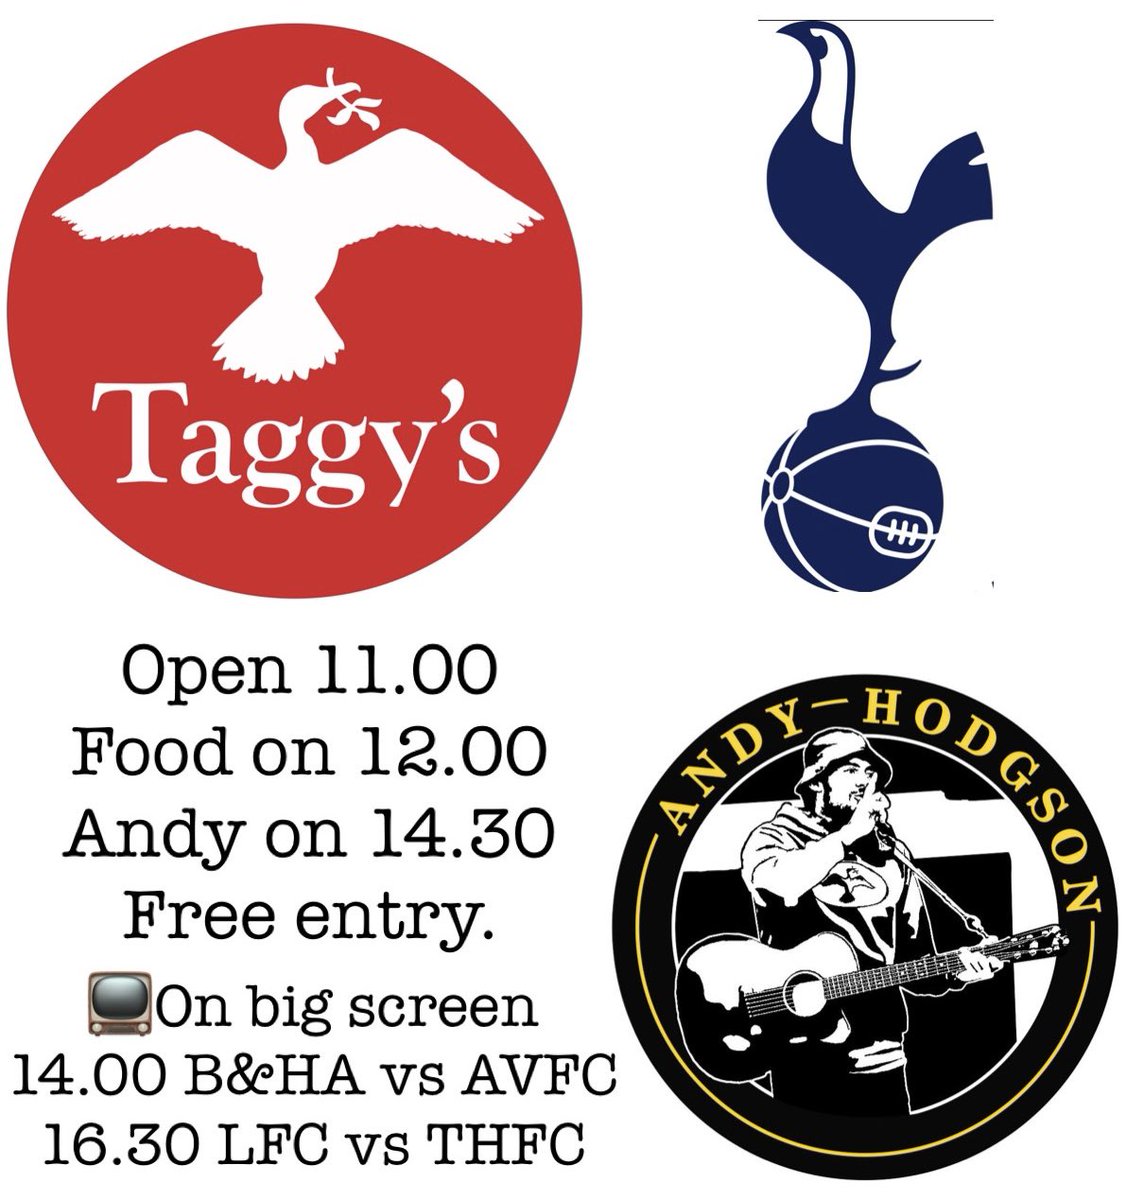 Today's info. It's a beautiful day to enjoy a drink in our Beergarden today. Come early to avoid que. We have moved more tables to the footie pitch for this match. Buckets of 12 beer bottles in ice is £42. Scarfs, tee's and hoodies on sale in our little merch hut at the front.